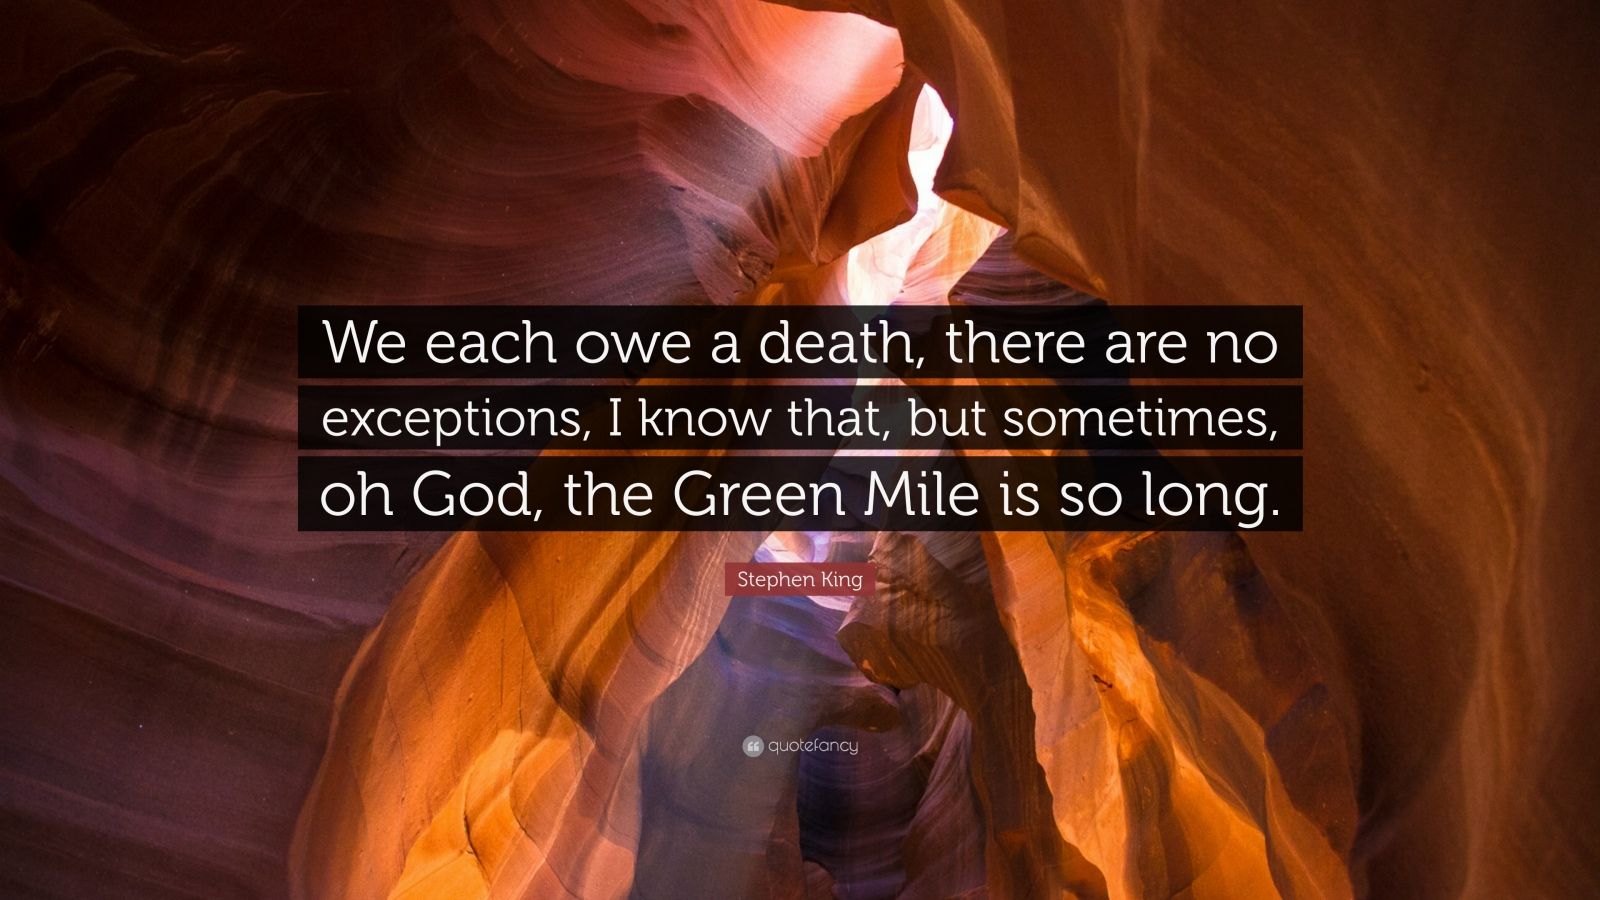 78450-Stephen-King-Quote-We-each-owe-a-death-there-are-no-exceptions-I.jpg